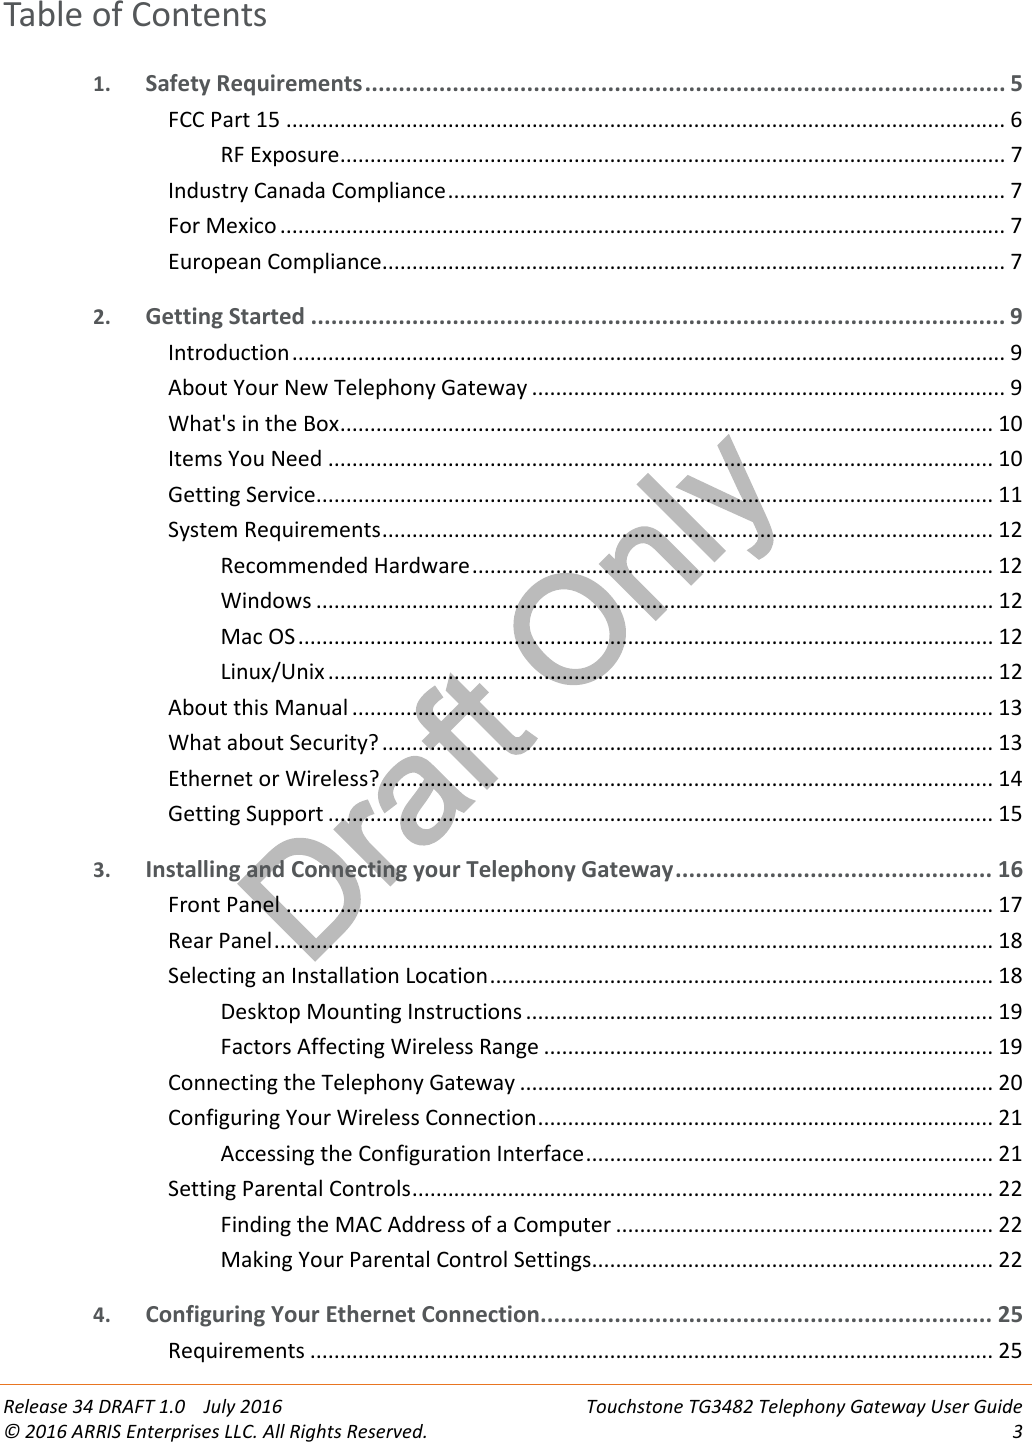 Draft OnlyRelease 34 DRAFT 1.0 July 2016 Touchstone TG3482 Telephony Gateway User Guide© 2016 ARRIS Enterprises LLC. All Rights Reserved. 3Table of Contents1. Safety Requirements............................................................................................... 5FCC Part 15 ........................................................................................................................ 6RF Exposure............................................................................................................... 7Industry Canada Compliance............................................................................................. 7For Mexico ......................................................................................................................... 7European Compliance........................................................................................................ 72. Getting Started ....................................................................................................... 9Introduction....................................................................................................................... 9About Your New Telephony Gateway ............................................................................... 9What&apos;s in the Box............................................................................................................. 10Items You Need ............................................................................................................... 10Getting Service................................................................................................................. 11System Requirements...................................................................................................... 12Recommended Hardware....................................................................................... 12Windows ................................................................................................................. 12Mac OS.................................................................................................................... 12Linux/Unix ............................................................................................................... 12About this Manual ........................................................................................................... 13What about Security? ...................................................................................................... 13Ethernet or Wireless?...................................................................................................... 14Getting Support ............................................................................................................... 153. Installing and Connecting your Telephony Gateway............................................... 16Front Panel ...................................................................................................................... 17Rear Panel........................................................................................................................ 18Selecting an Installation Location.................................................................................... 18Desktop Mounting Instructions .............................................................................. 19Factors Affecting Wireless Range ........................................................................... 19Connecting the Telephony Gateway ............................................................................... 20Configuring Your Wireless Connection............................................................................ 21Accessing the Configuration Interface.................................................................... 21Setting Parental Controls................................................................................................. 22Finding the MAC Address of a Computer ............................................................... 22Making Your Parental Control Settings................................................................... 224. Configuring Your Ethernet Connection................................................................... 25Requirements .................................................................................................................. 25